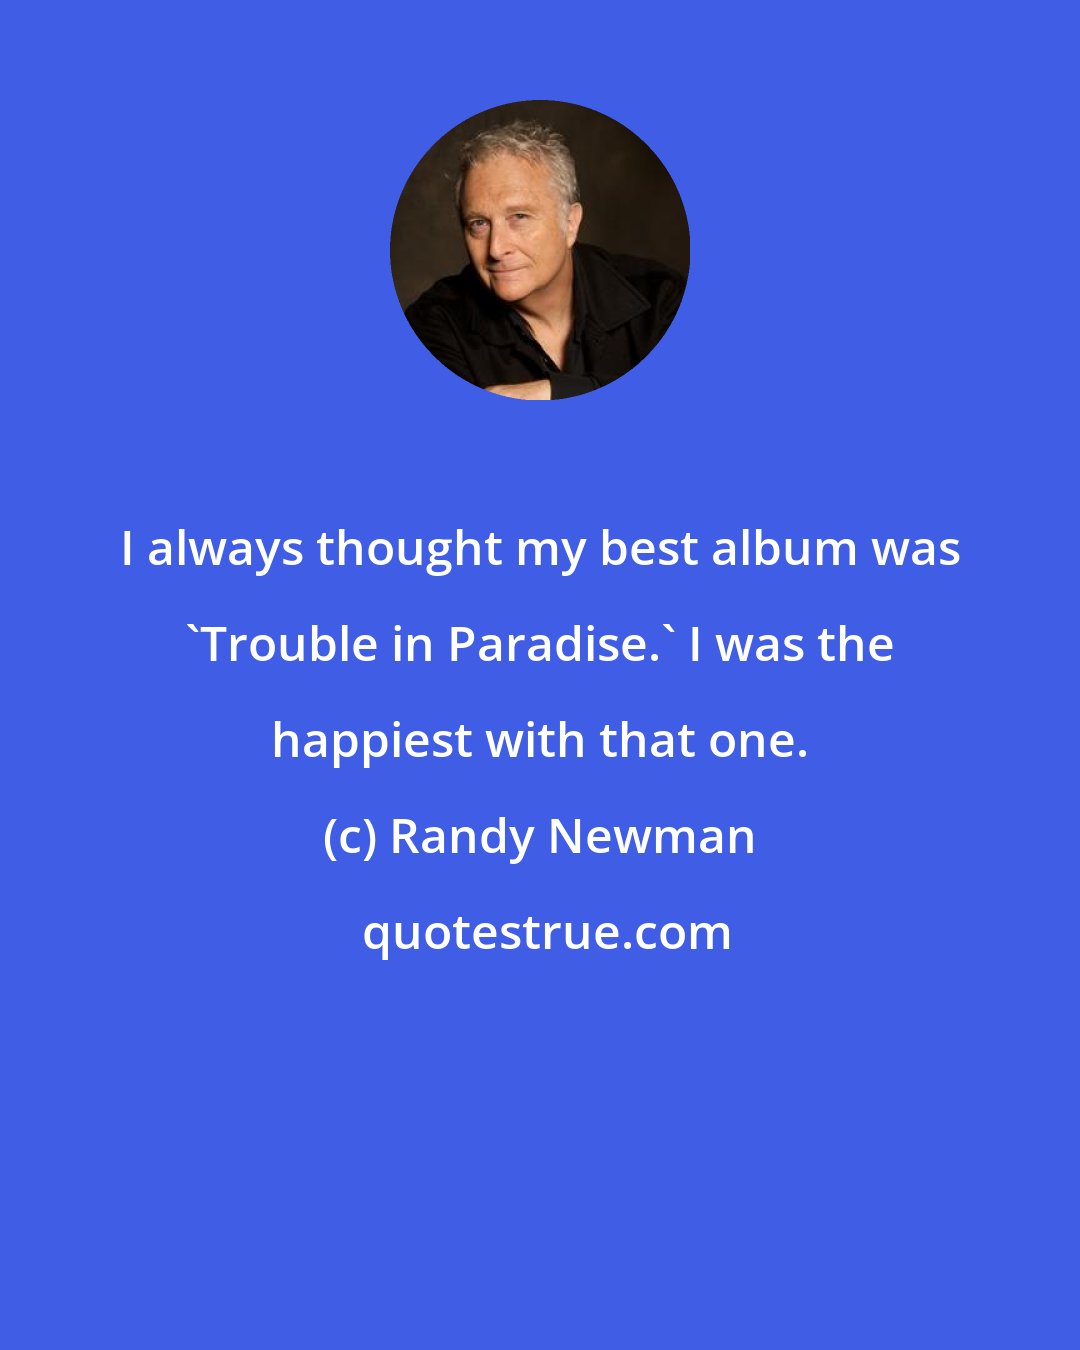 Randy Newman: I always thought my best album was 'Trouble in Paradise.' I was the happiest with that one.